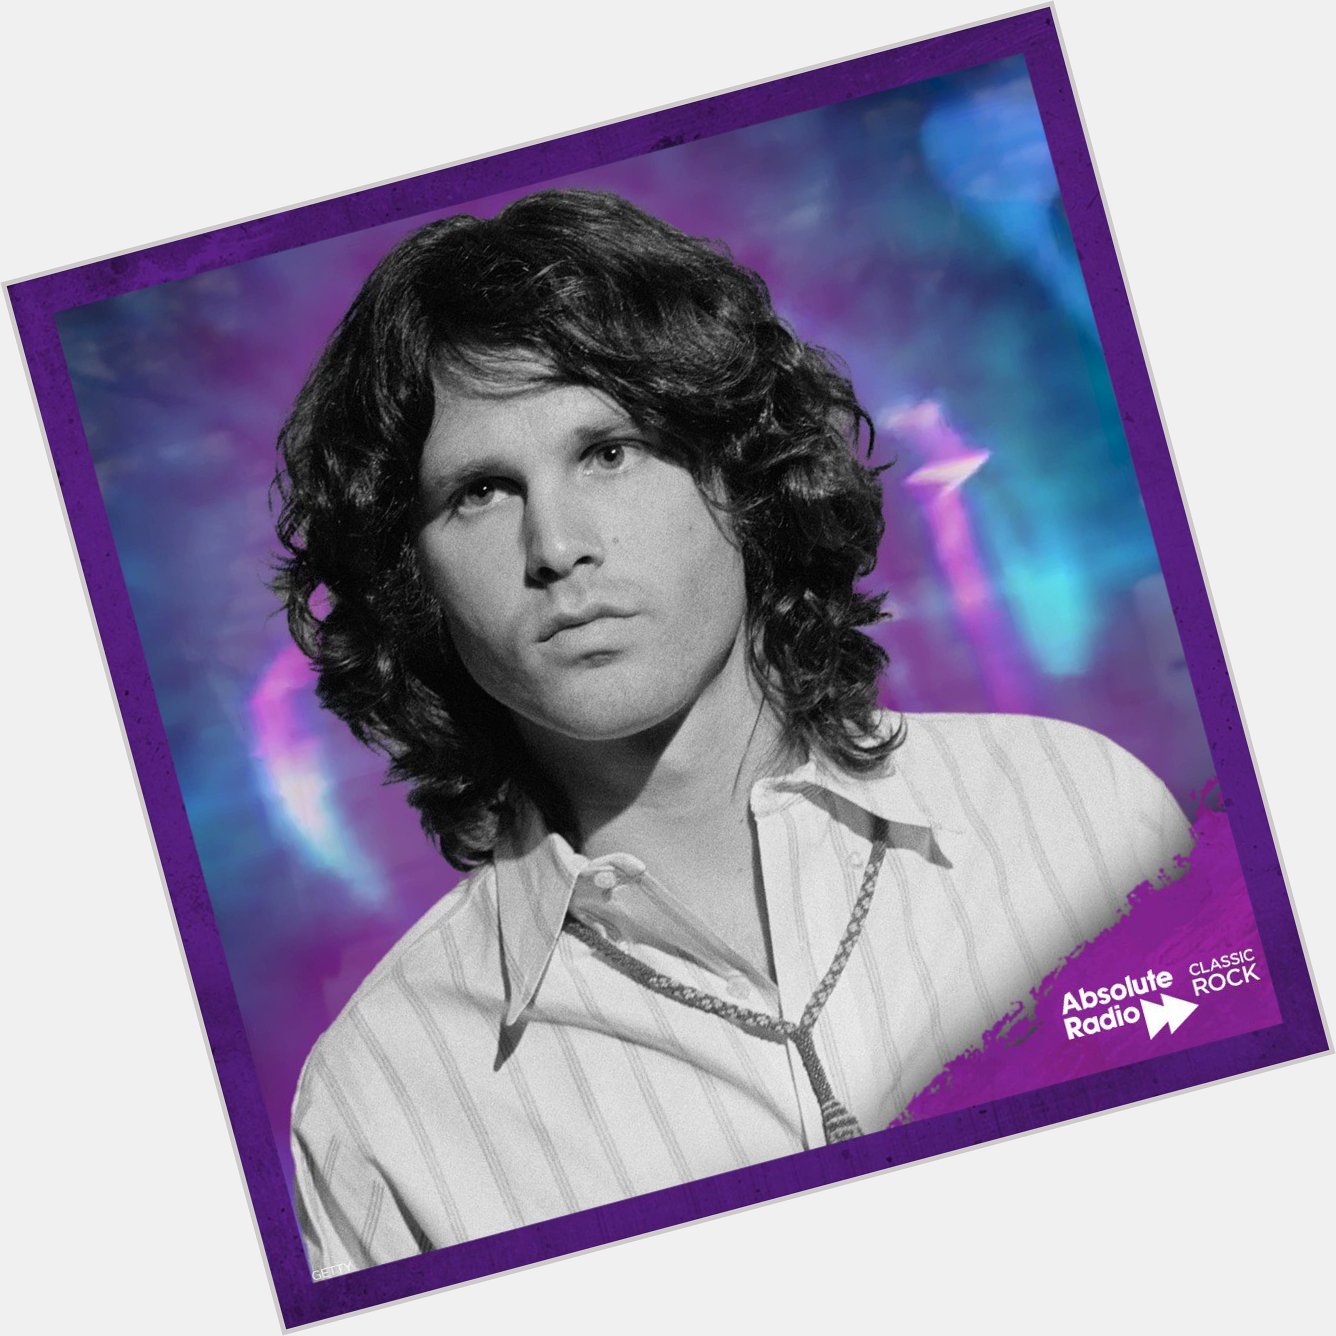 Happy birthday Jim Morrison  frontman was born on this day in 1943! 